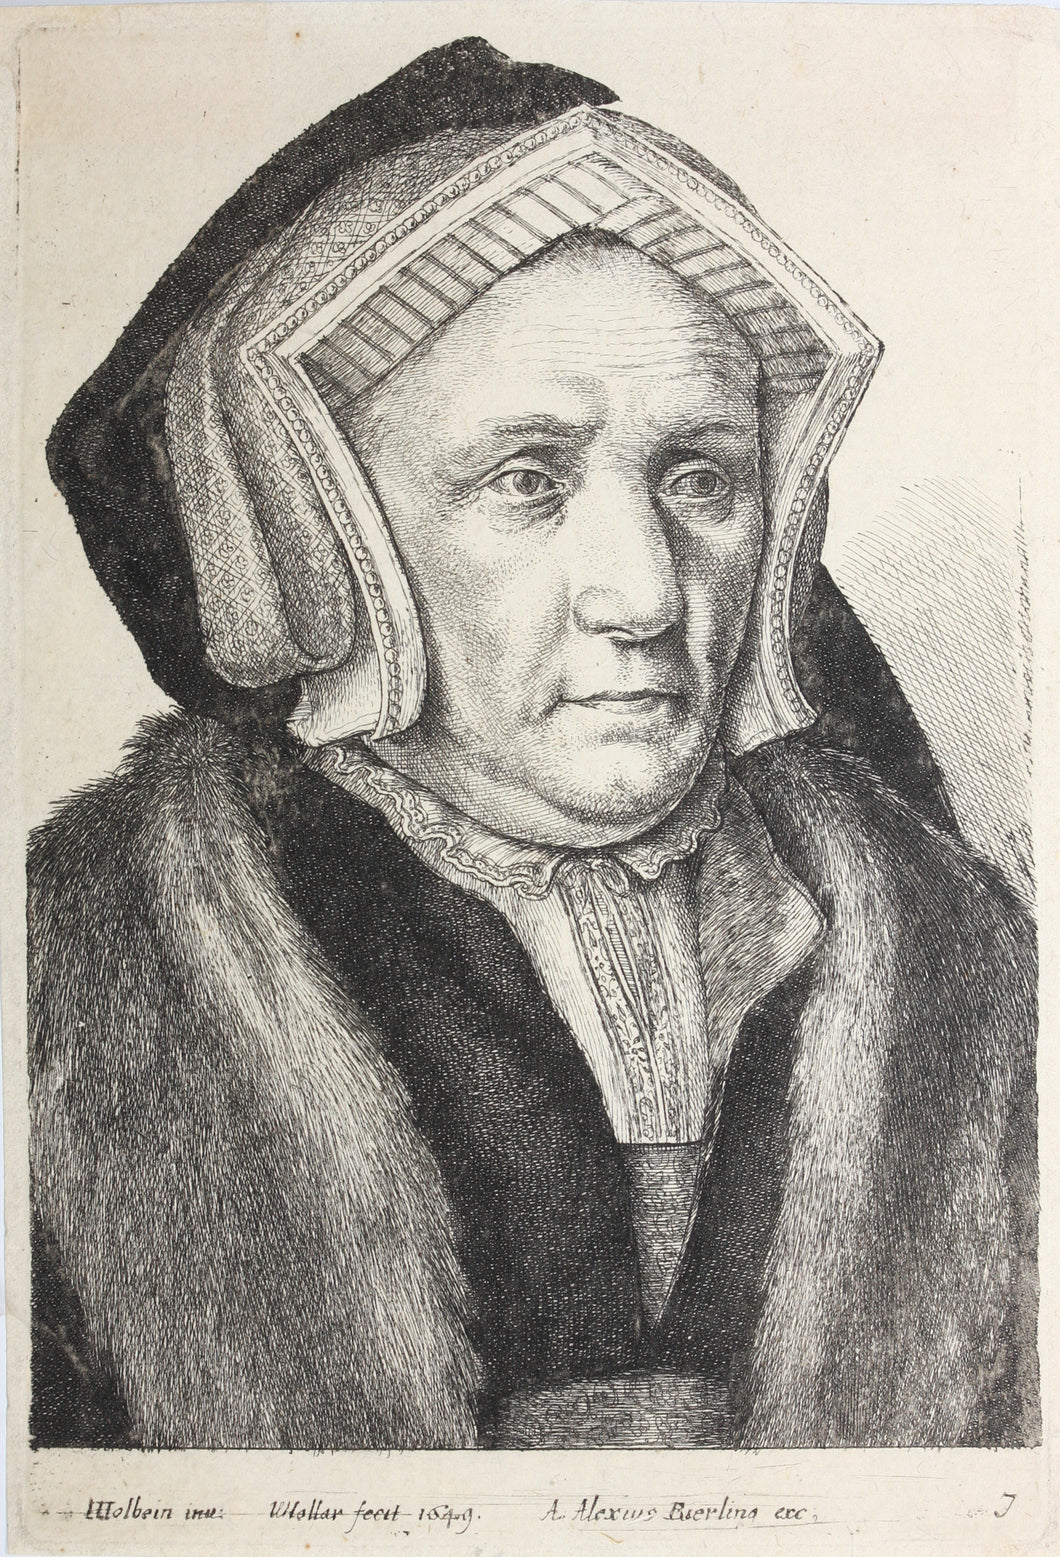 Hans Holbein the Younger, after. Portrait of Lady Margaret Butts. Etching by Wenceslaus Hollar. 1649.